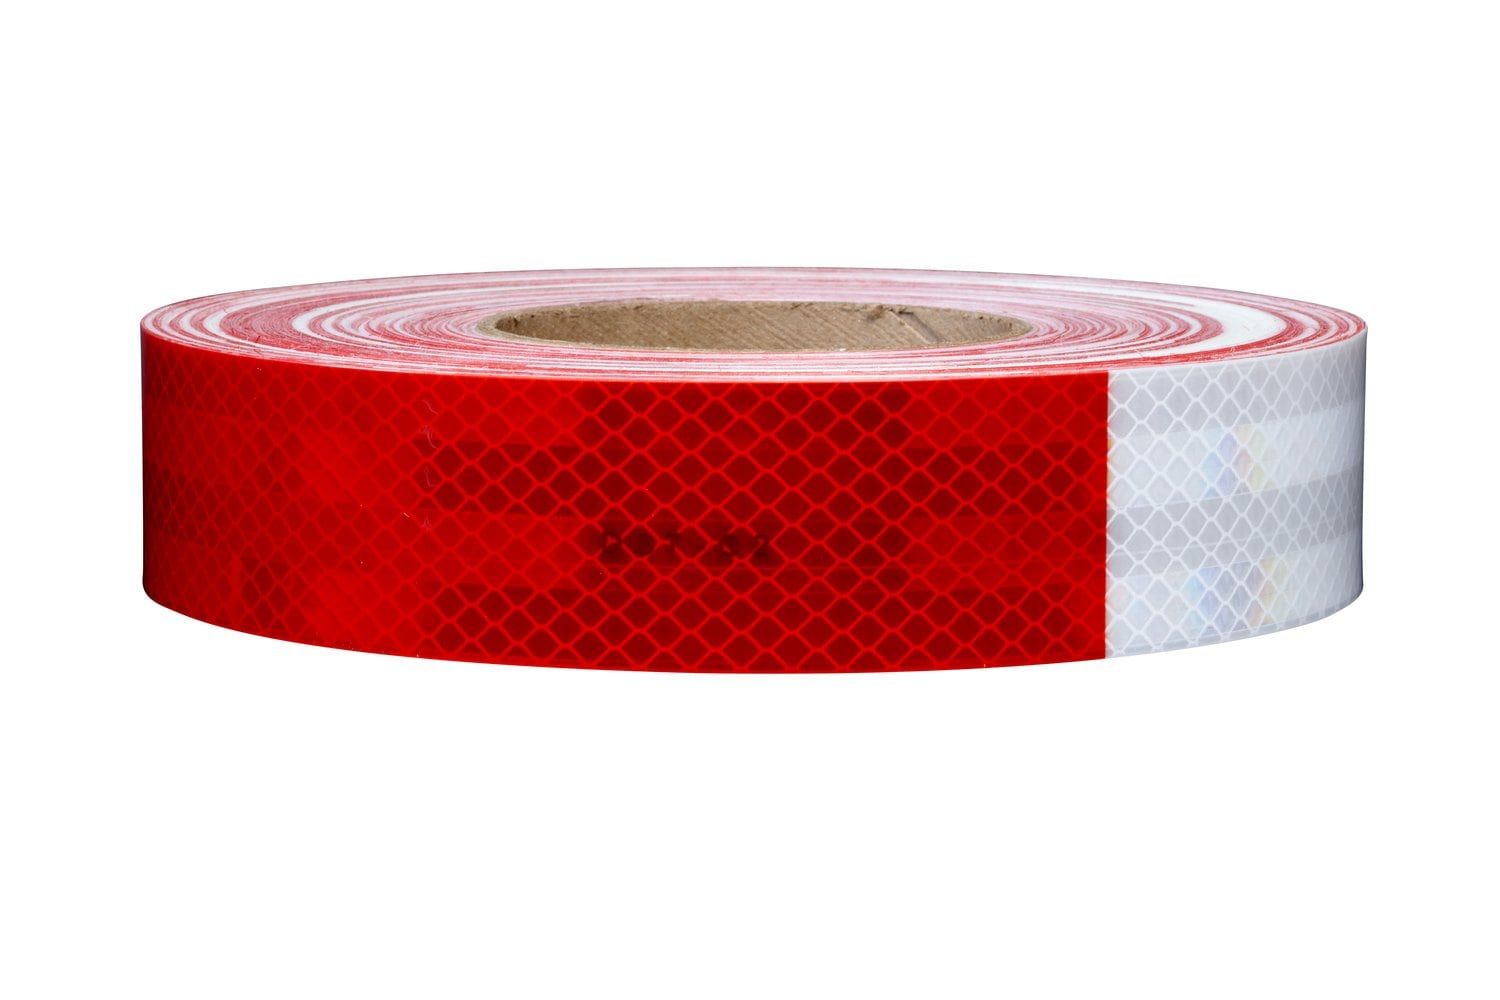 7010343866 - 3M Diamond Grade Conspicuity Markings 983-32, Red/White, DOT, 1.5 in x
50 yd, 12/Carton